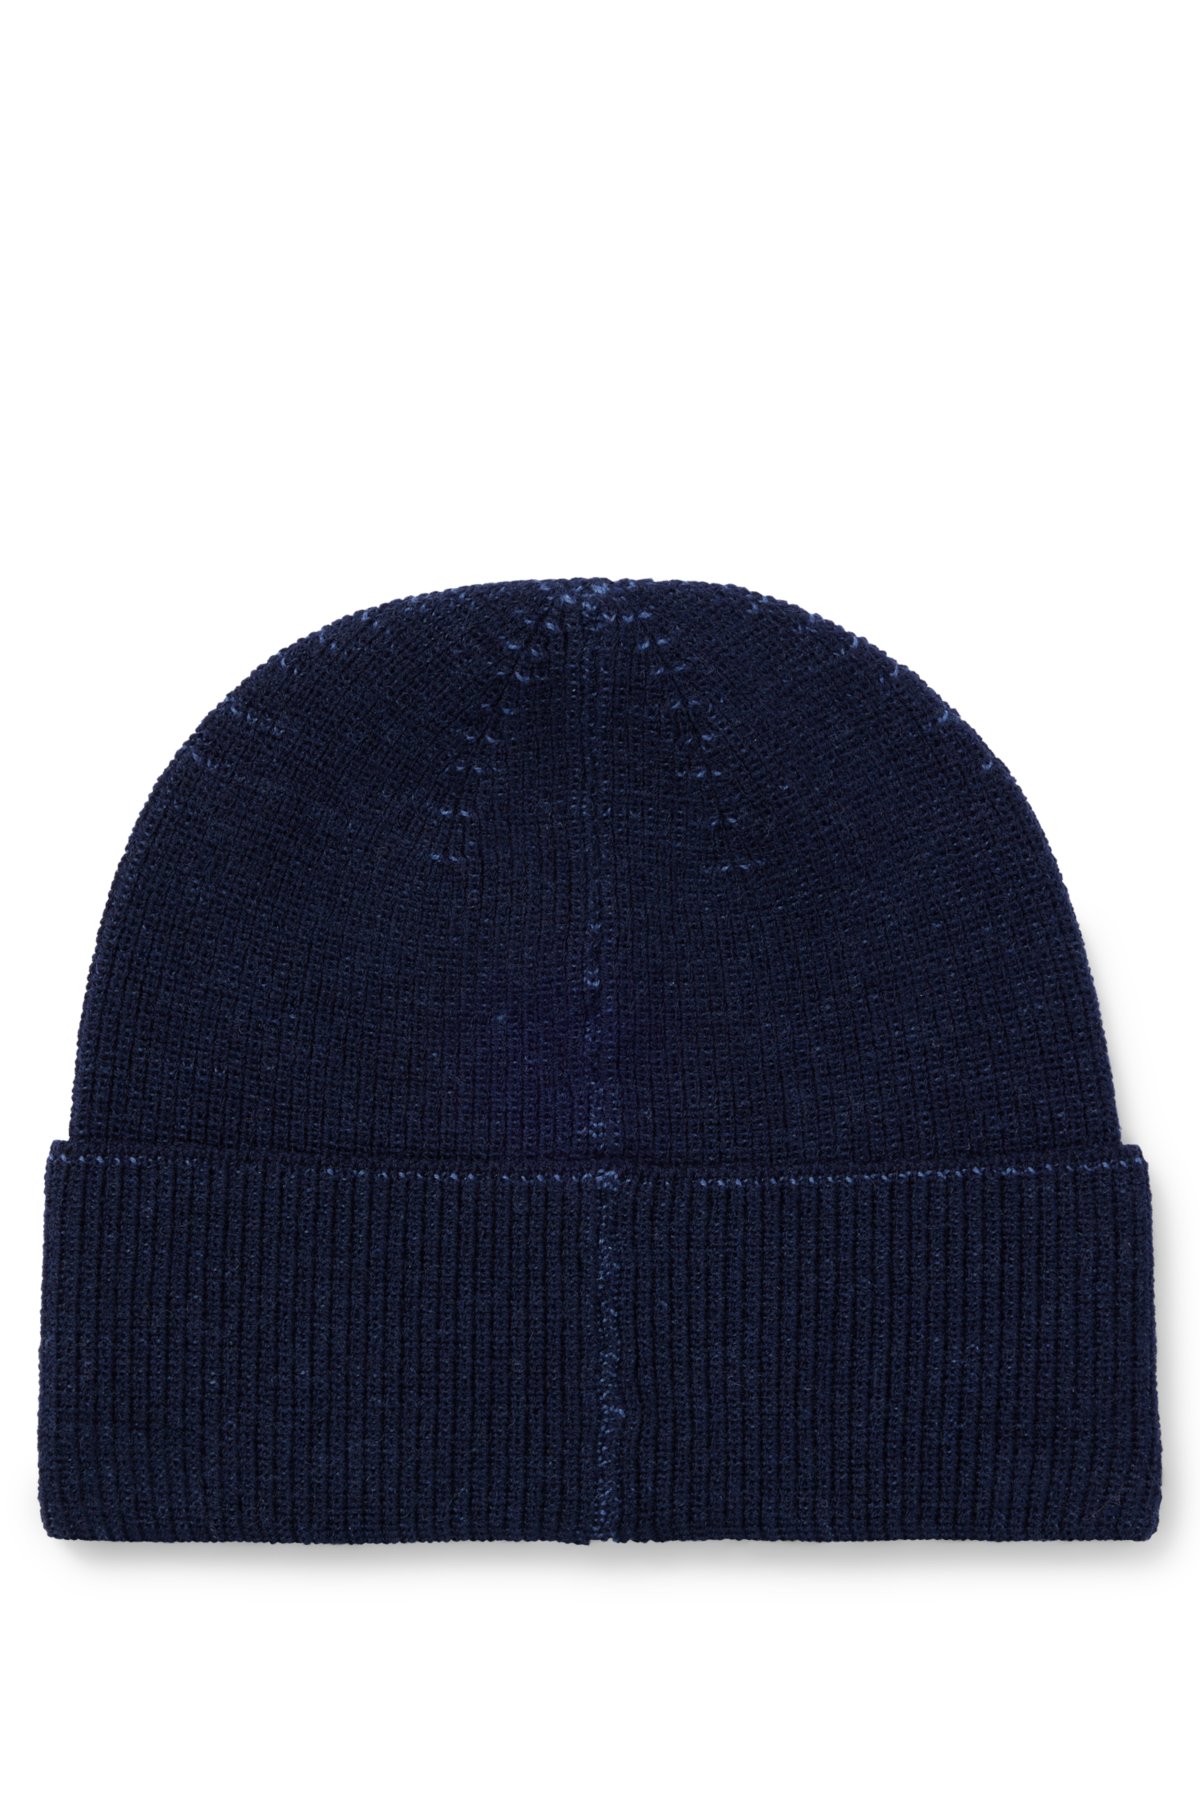 BOSS - Beanie hat with logo structured wool in